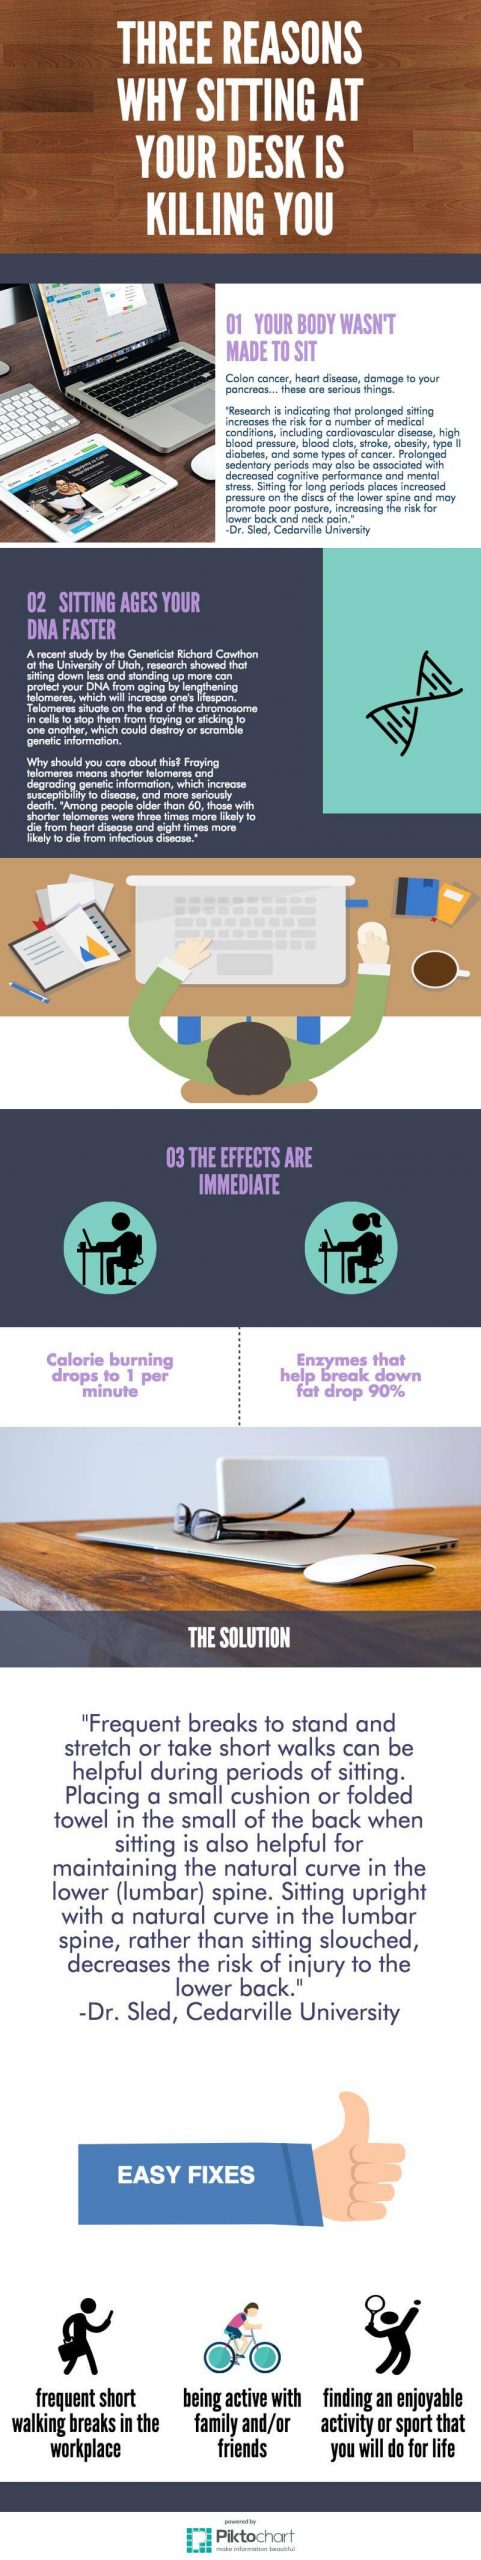 why sitting at your desk is killing you